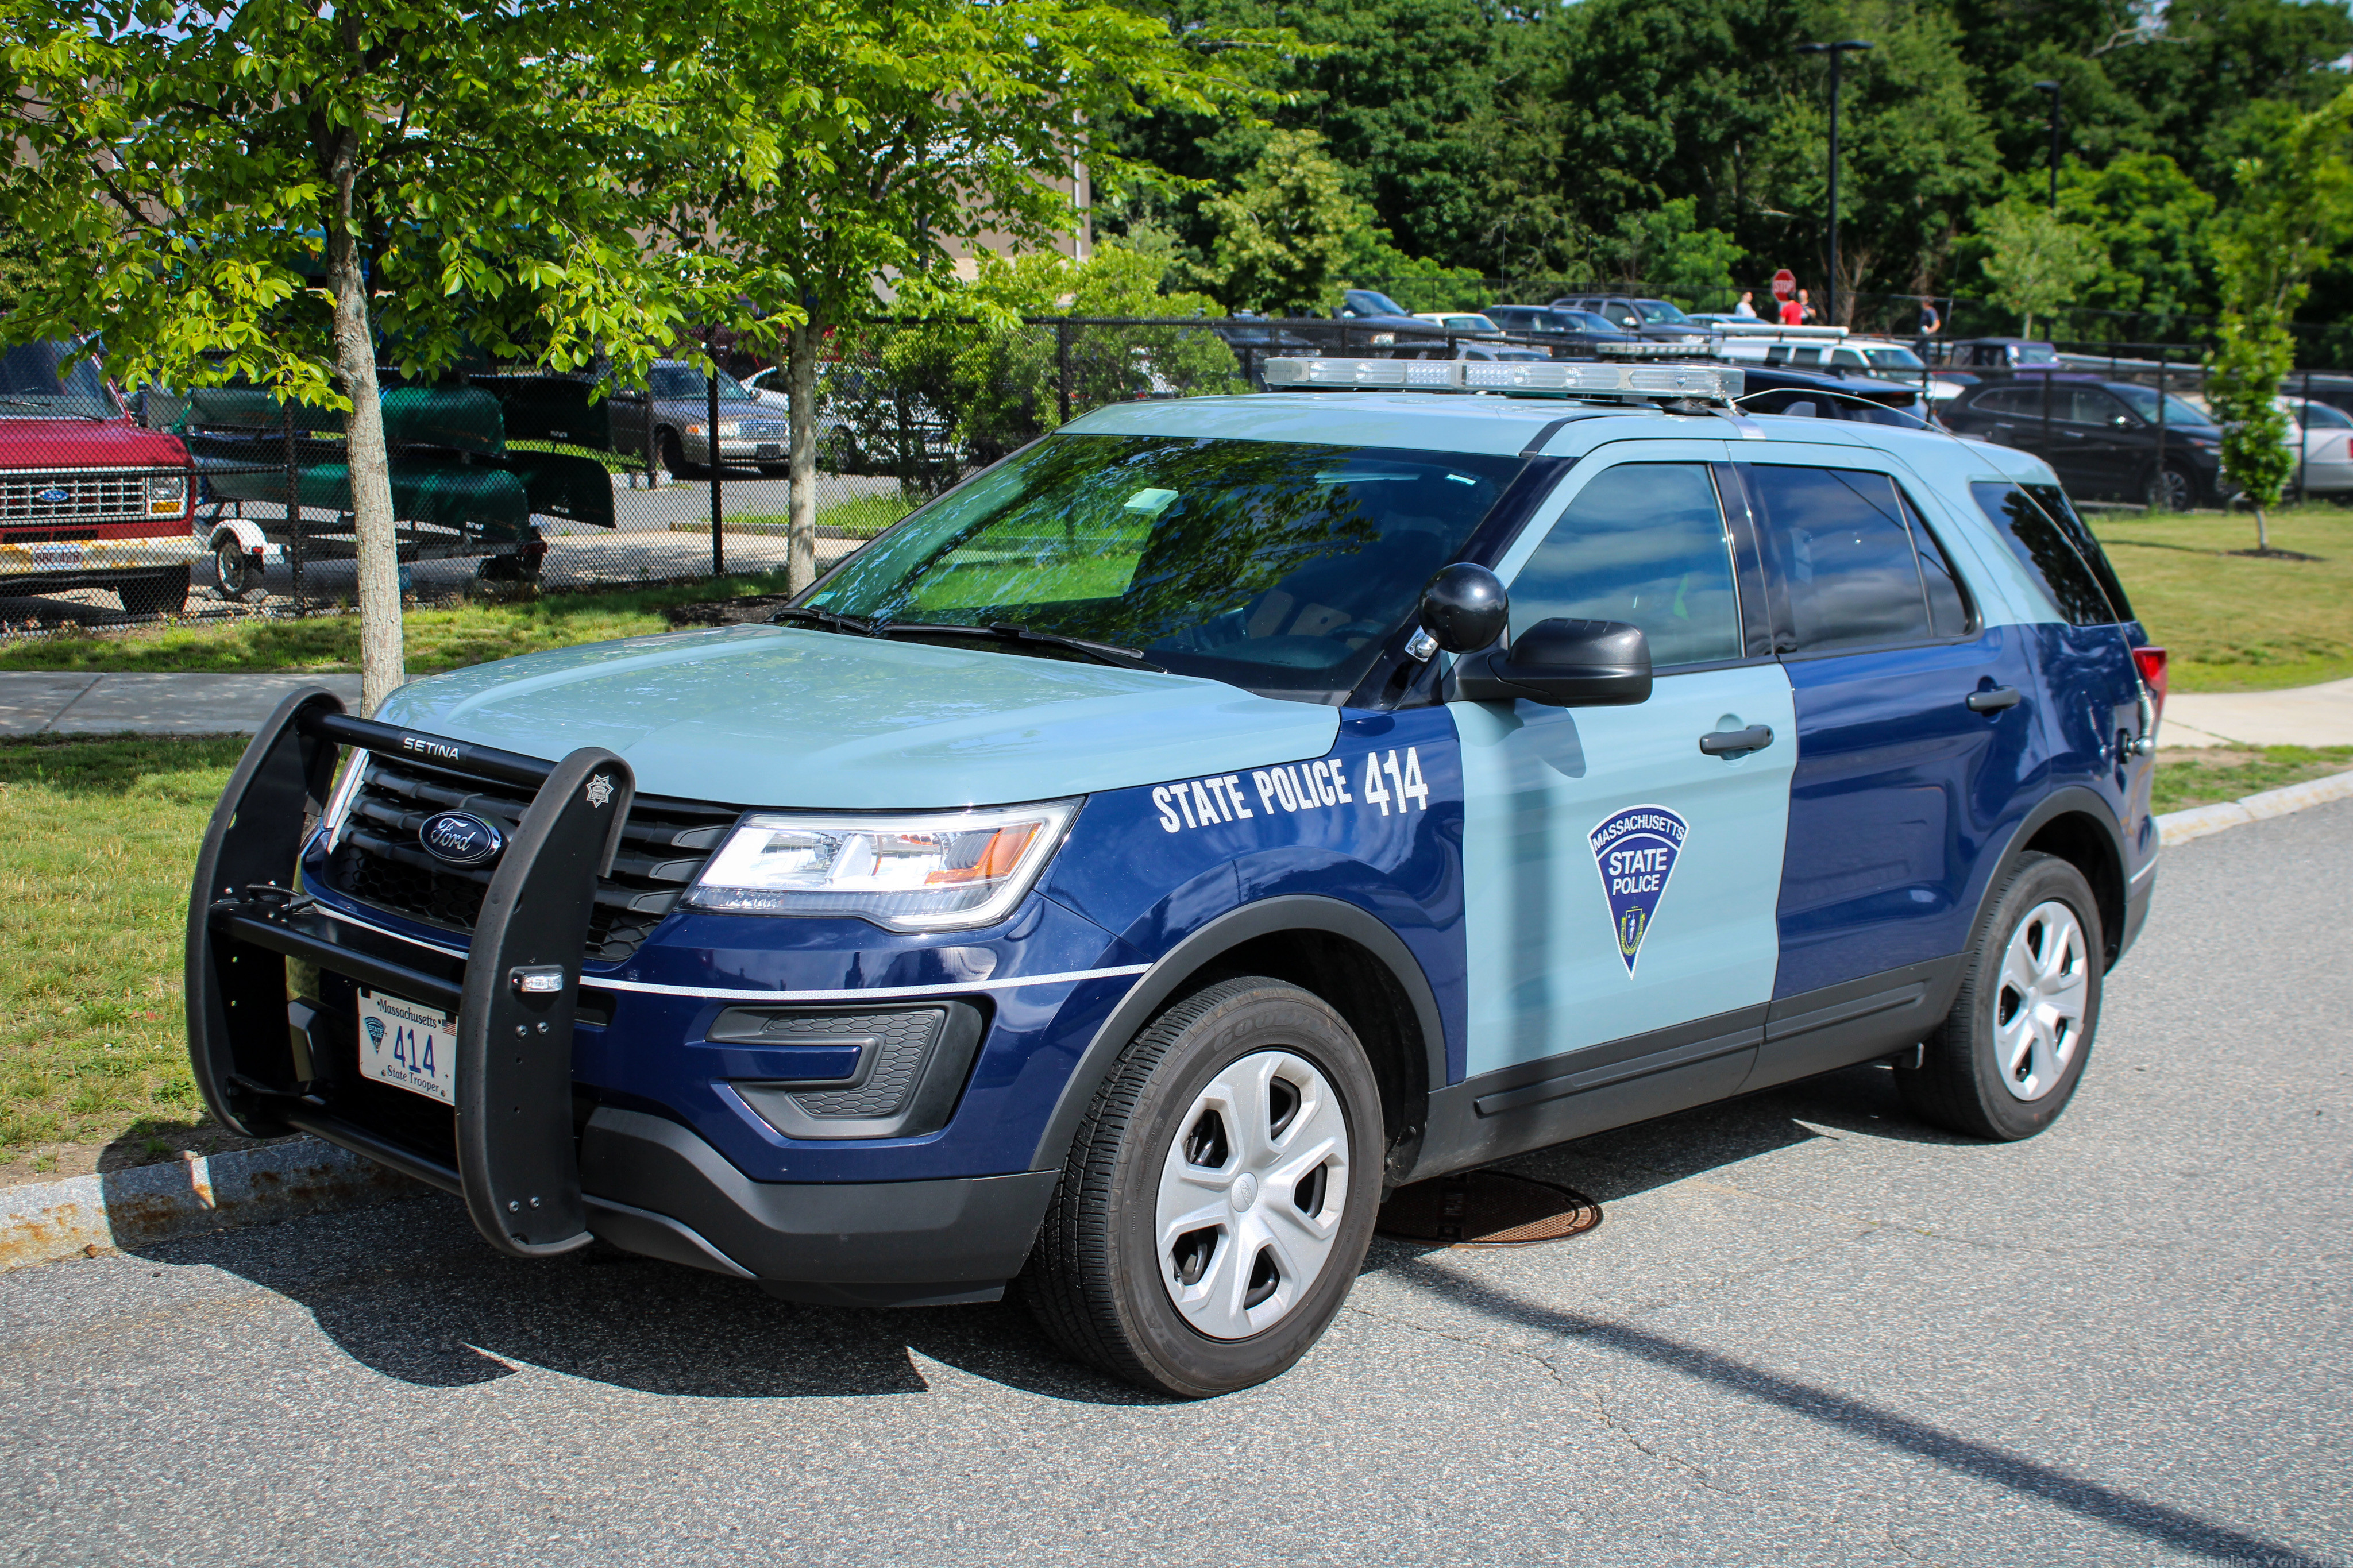 A photo  of Massachusetts State Police
            Cruiser 414, a 2018 Ford Police Interceptor Utility             taken by Nicholas You